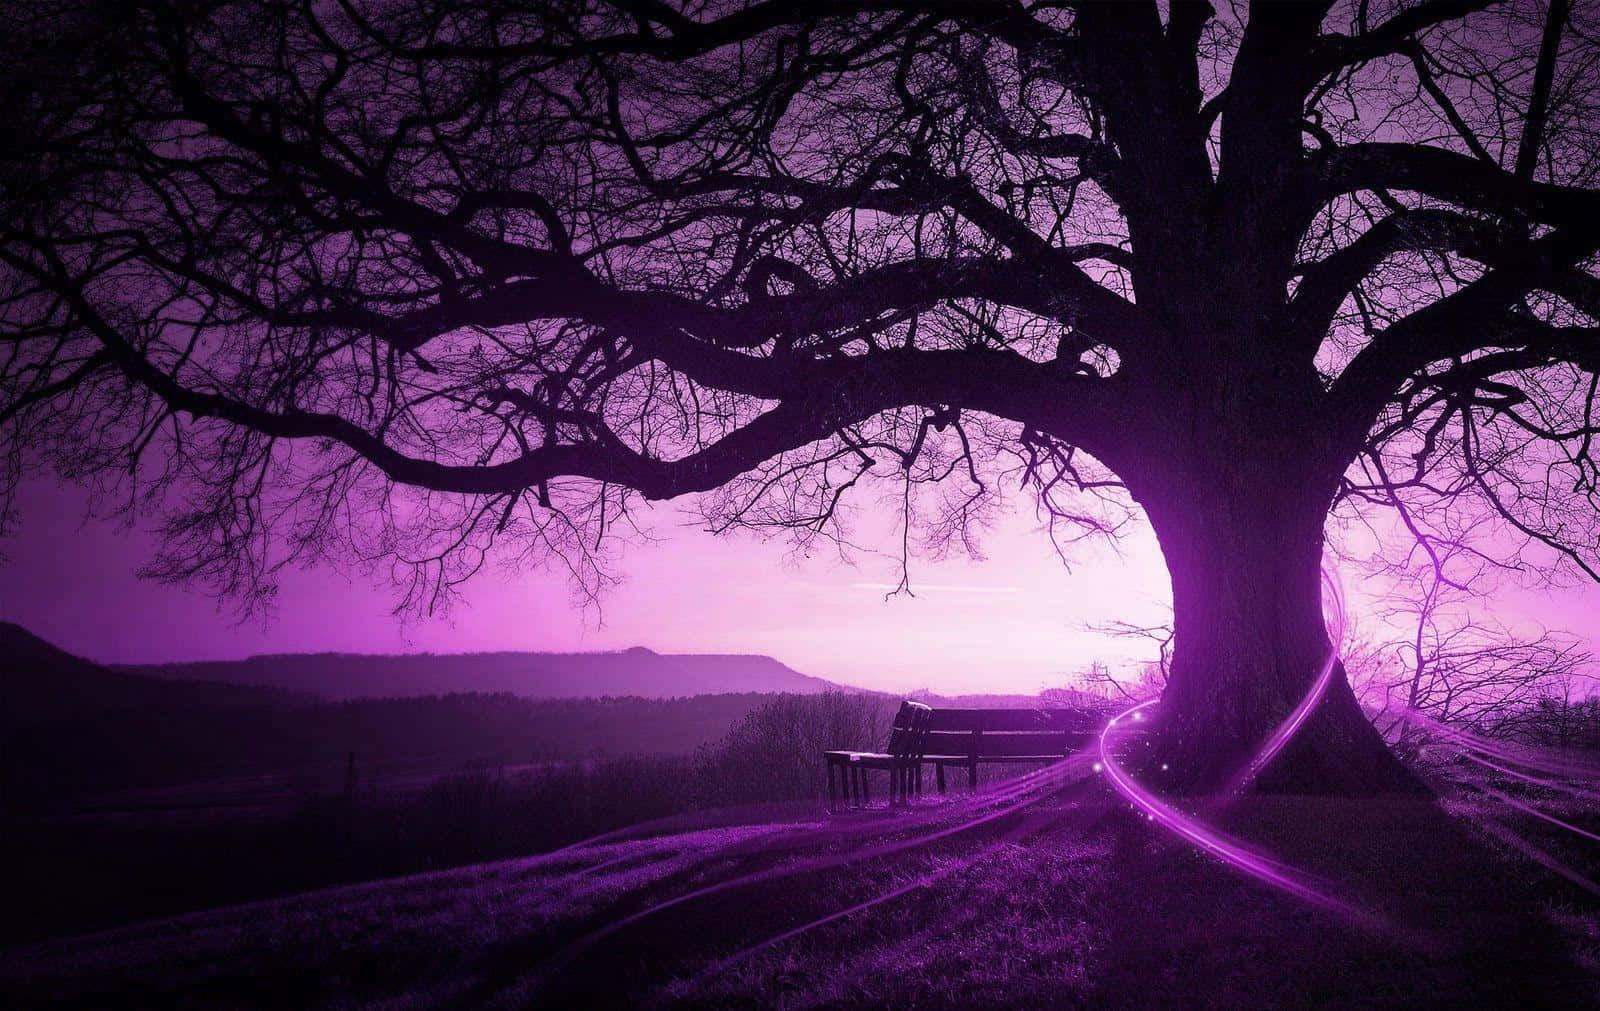 Purple Tree With A Bench In The Background